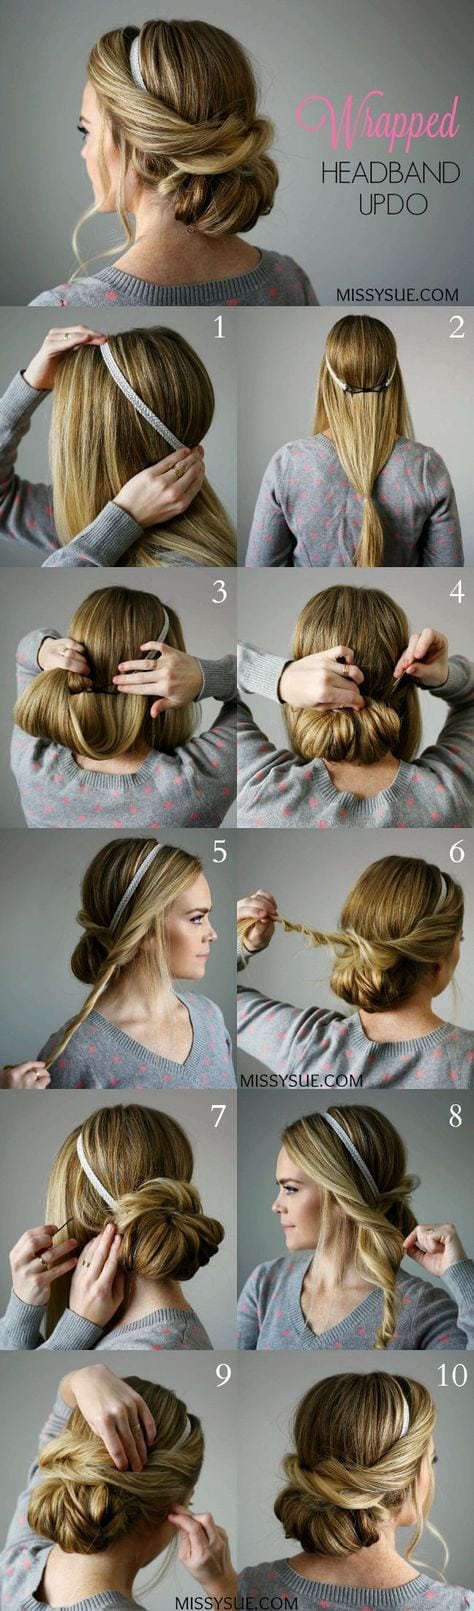 [ad_1]

25 Step By Step Tutorial For Beautiful Hair Updos.
Source by tsteffey
[ad_2]
			
			…